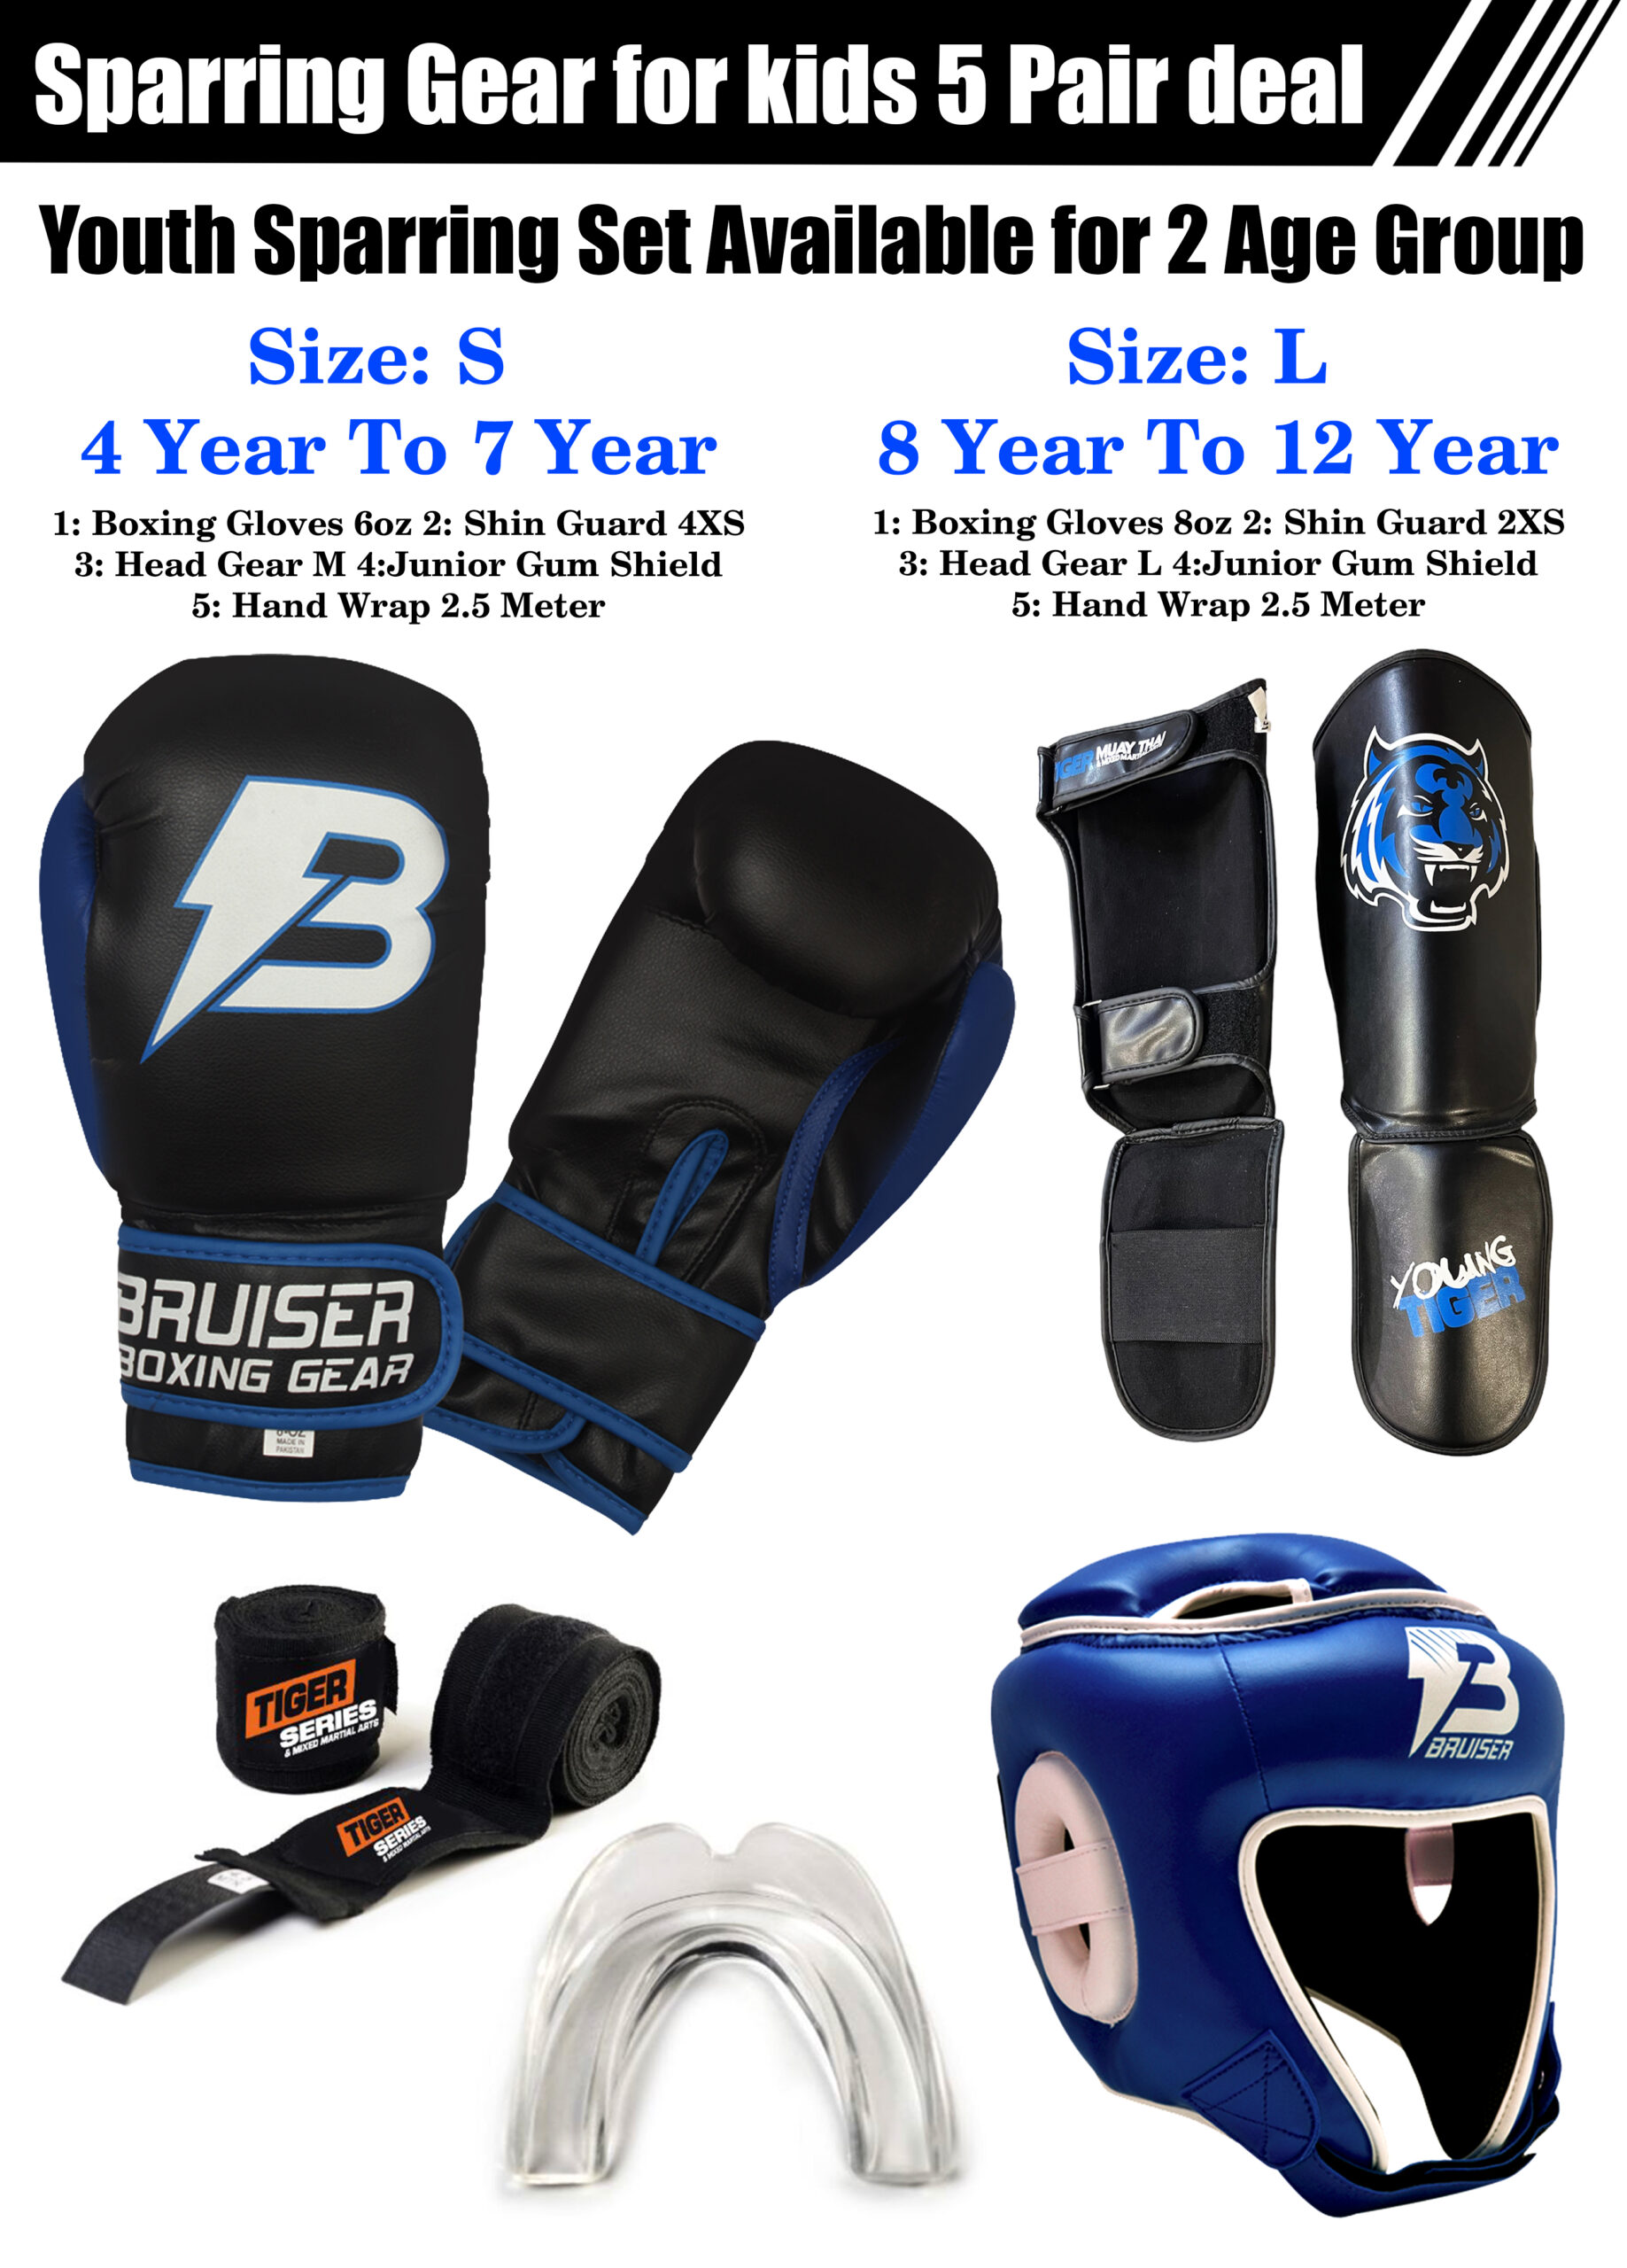 Youth 5 pair Sparring Set Deal